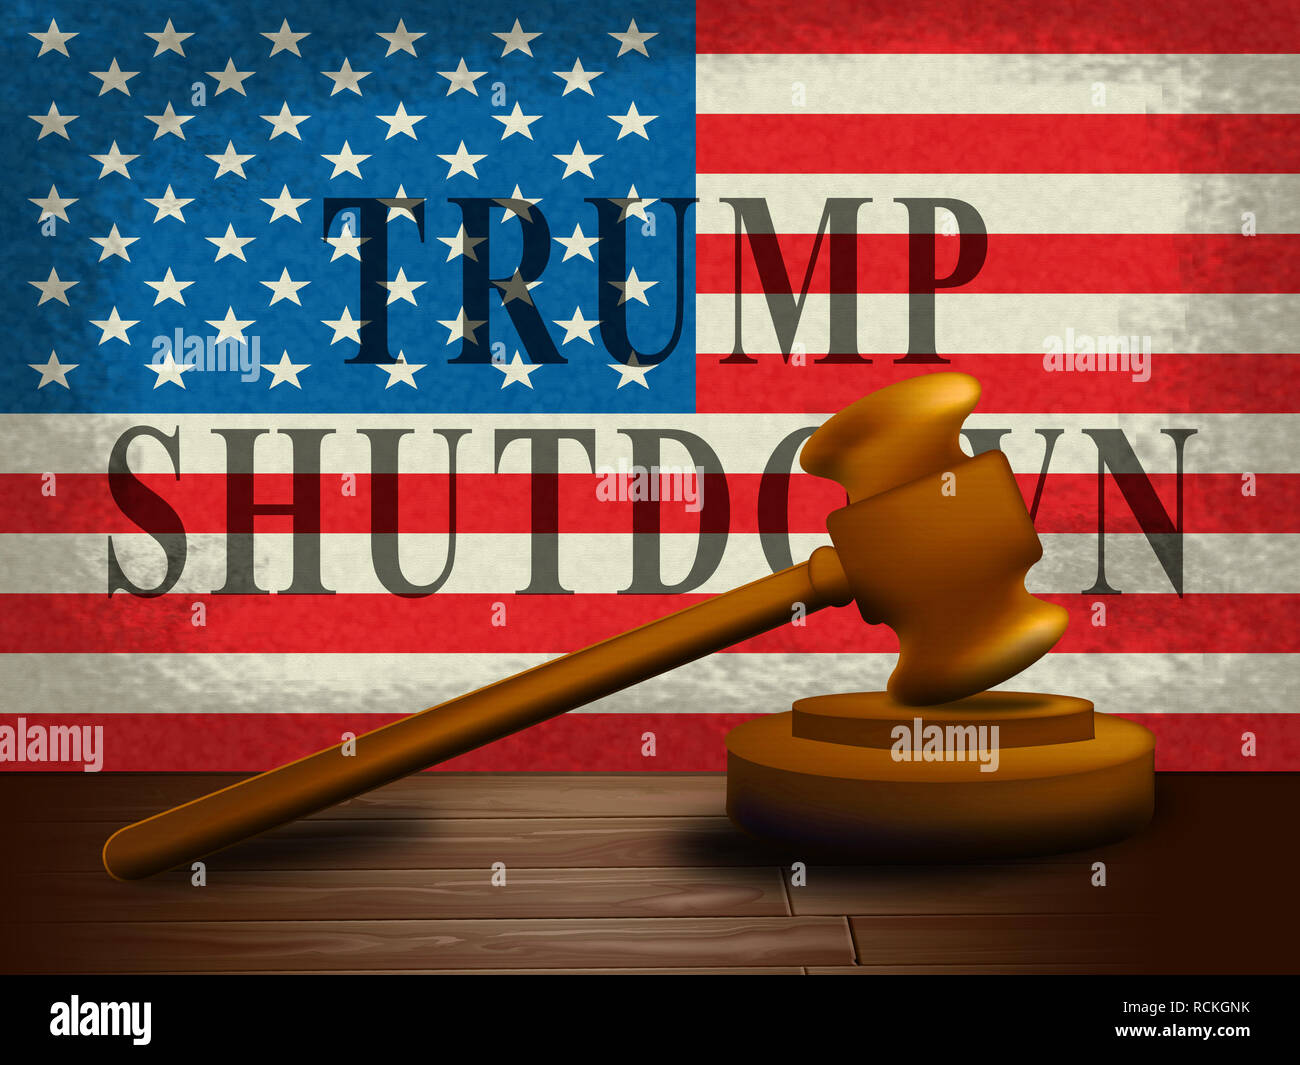 Washington, DC - January 2019: Trump Shutdown Gavel Means American Government Closed And Employees Furloughed. Standoff Between Democrats And Republic Stock Photo